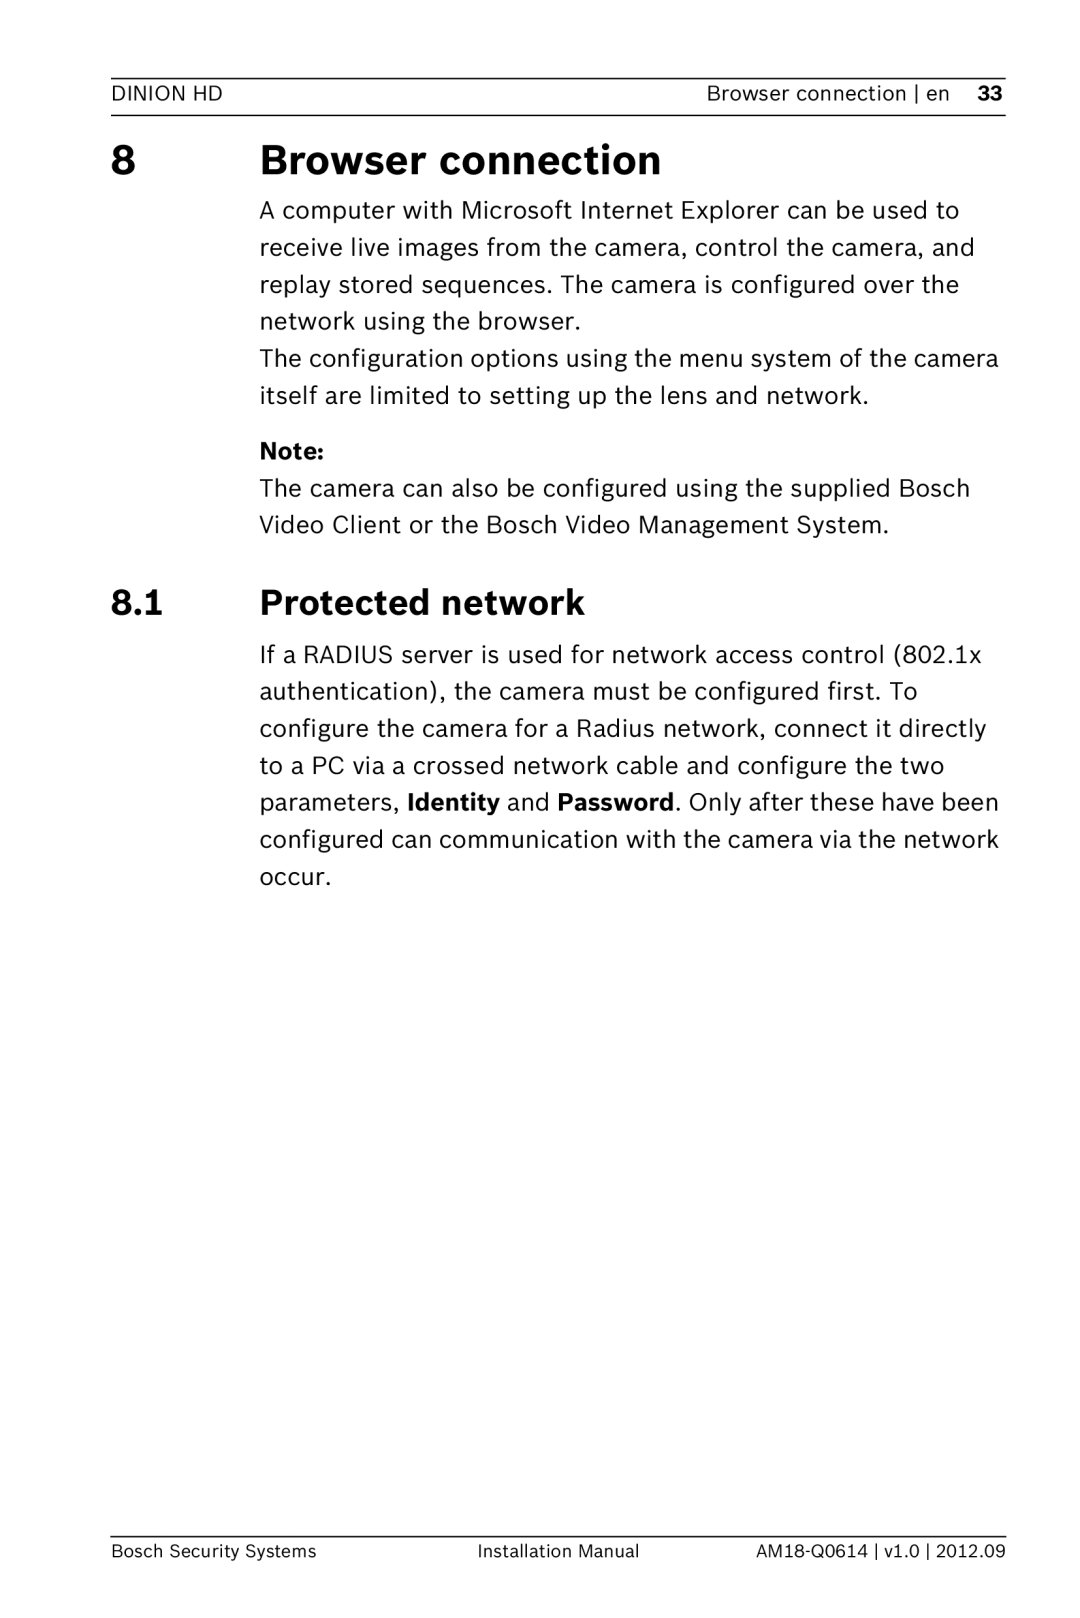 Bosch Appliances NBN-733 installation manual 8Browser connection, 8.1Protected network 